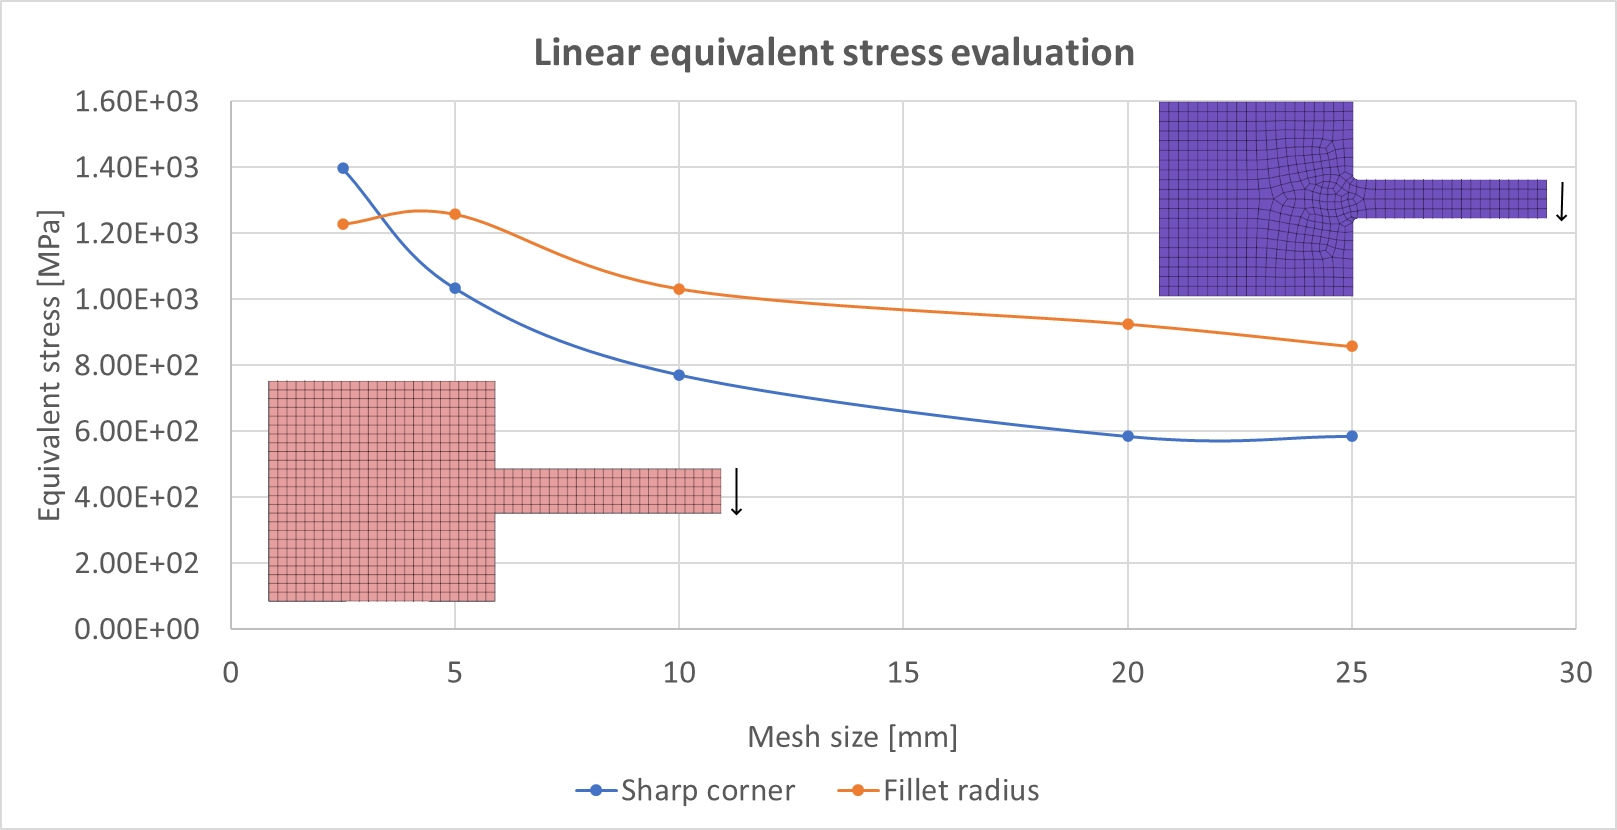 The relationship between mesh stress concentration behavior